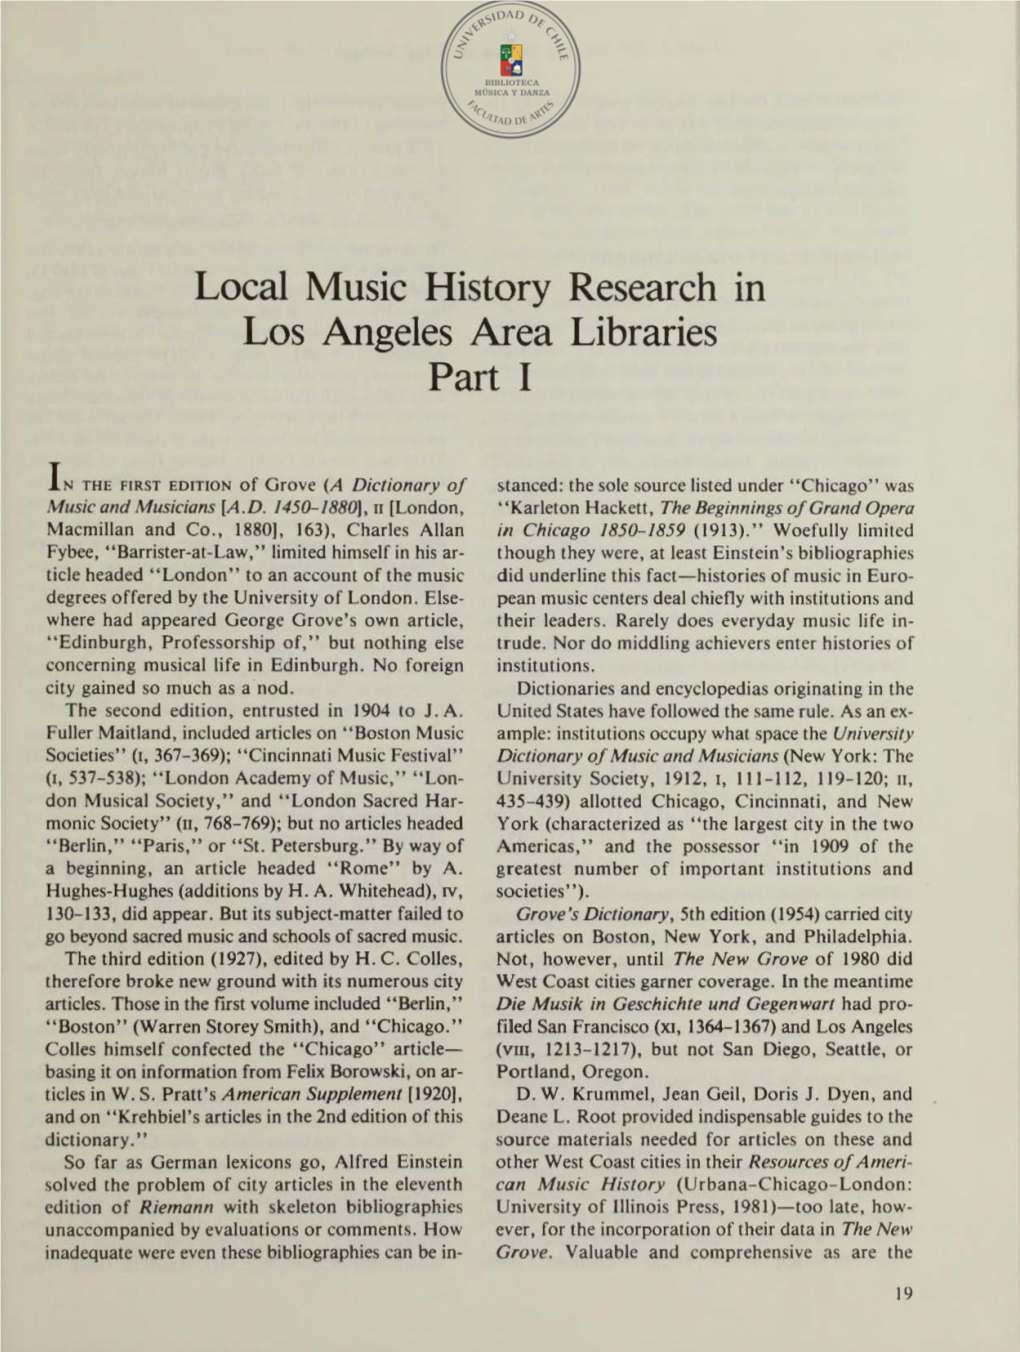 Local Music History Research Los Angeles Area Libraries